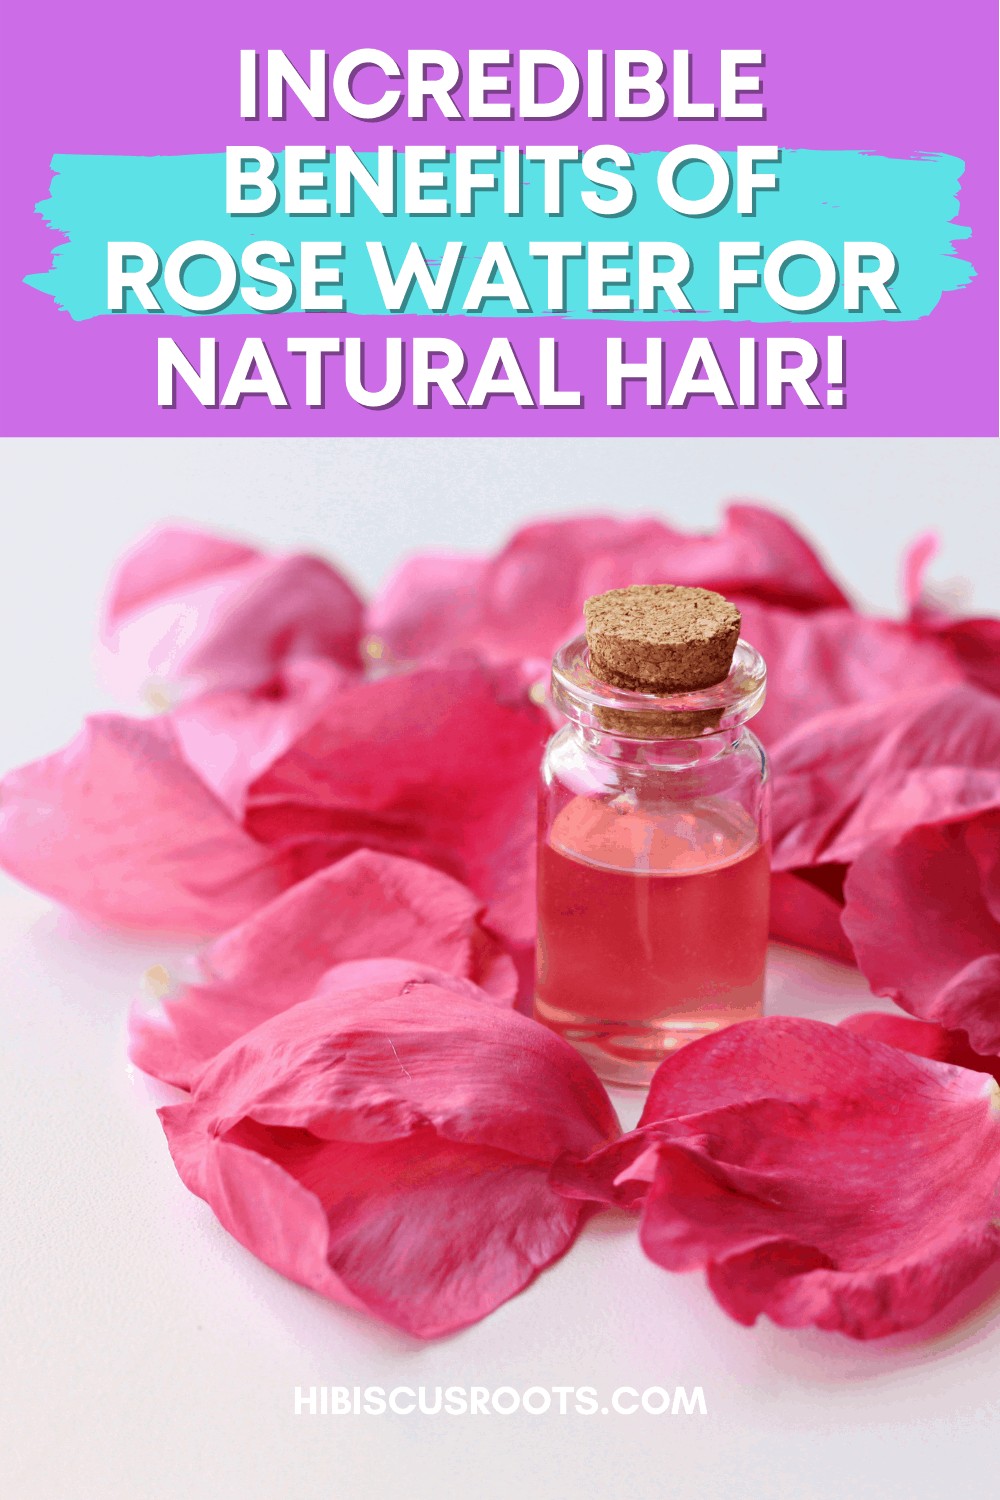 How to Make Rose Water for Natural Hair - Easy Recipe!